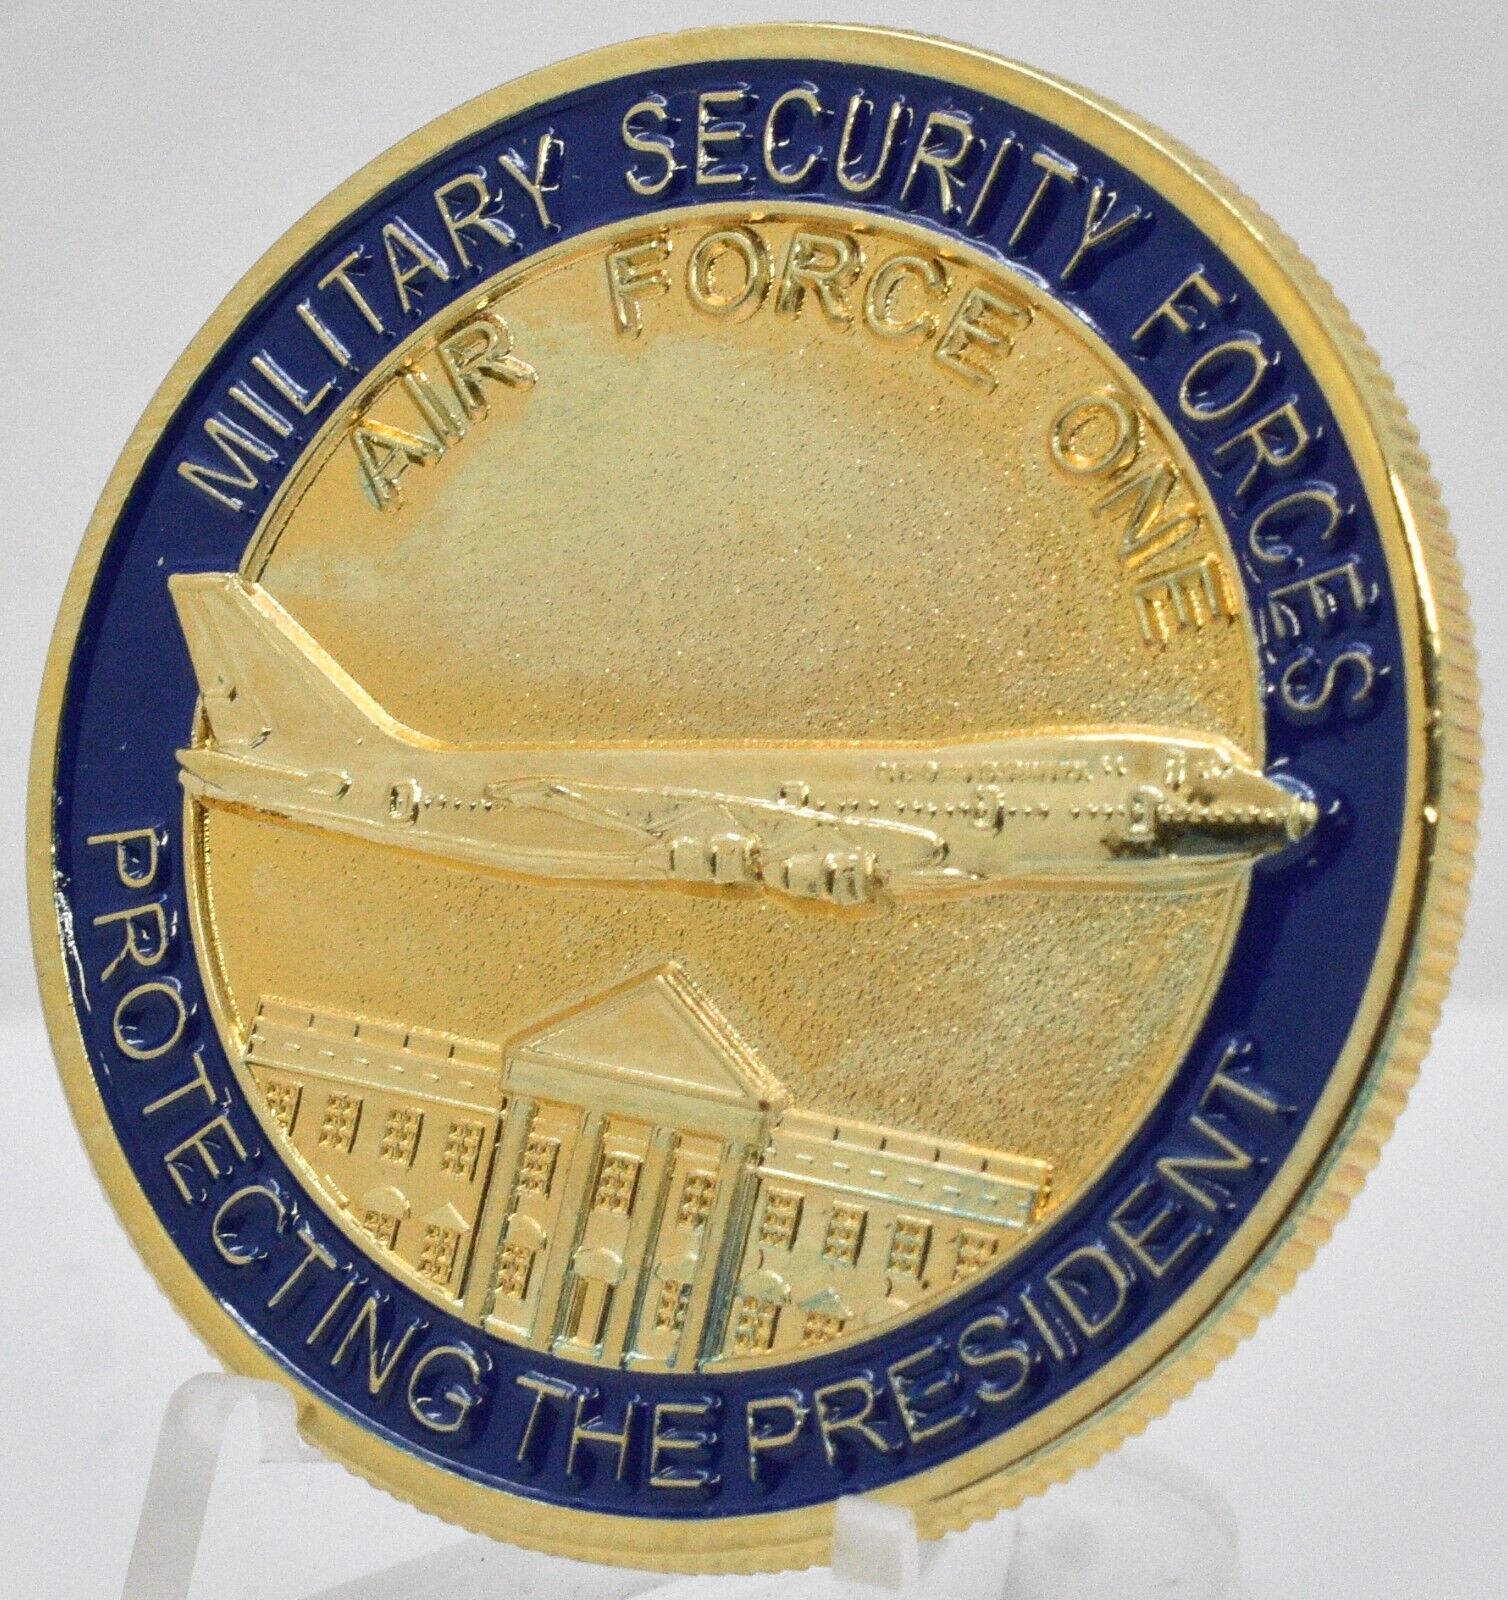 Air Force One Military Security Forces WHITE HOUSE CHALLENGE COIN